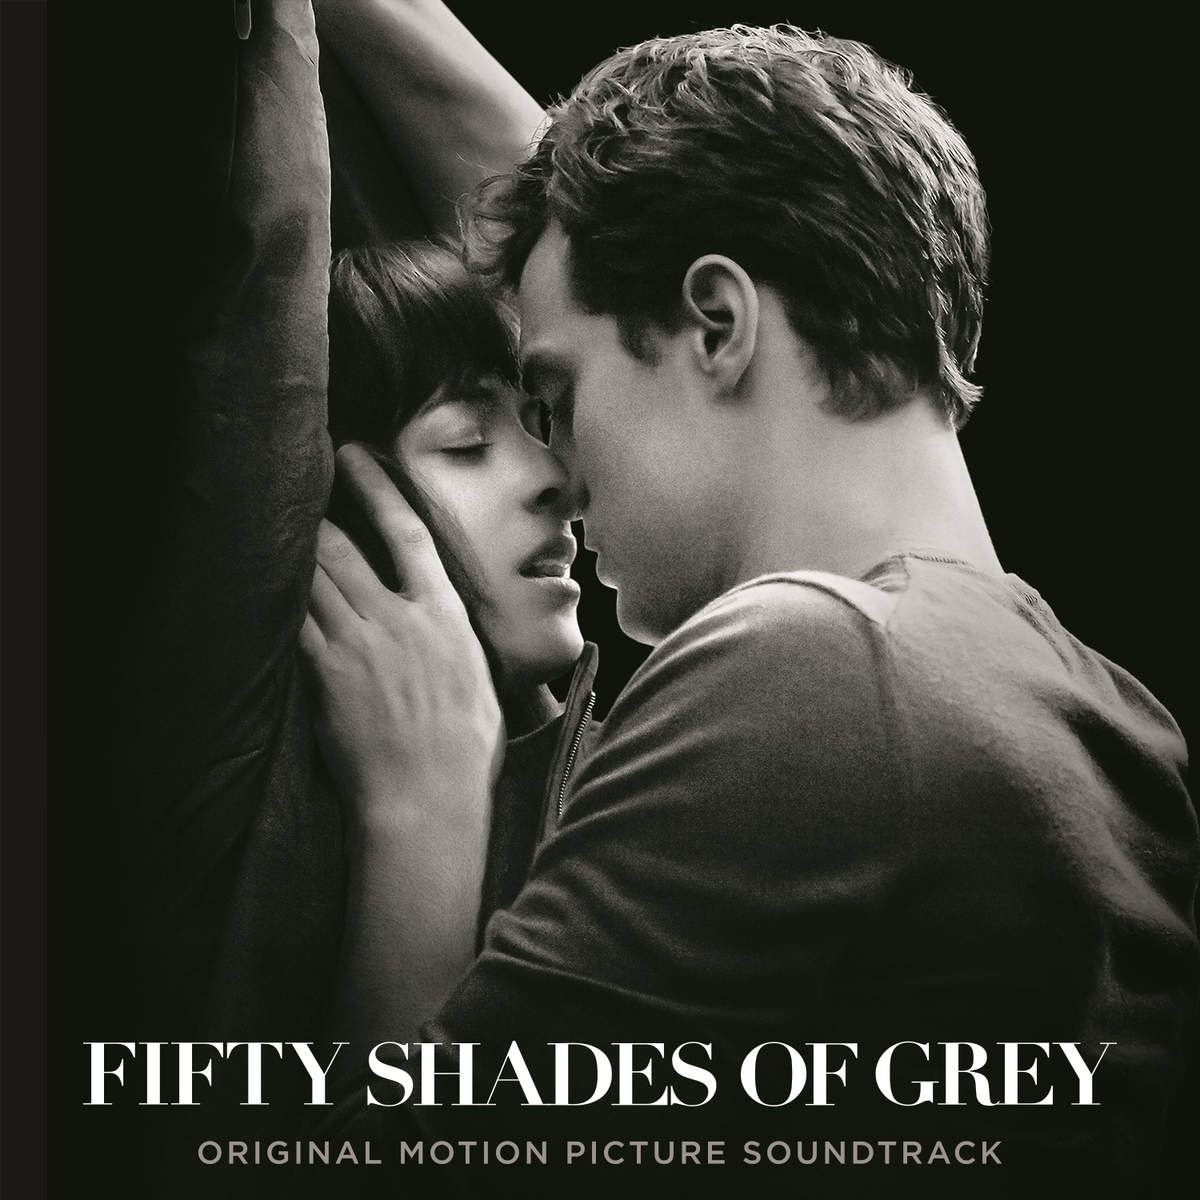 Meet Me In the Middle (From The "Fifty Shades Of Grey" Soundtrack)